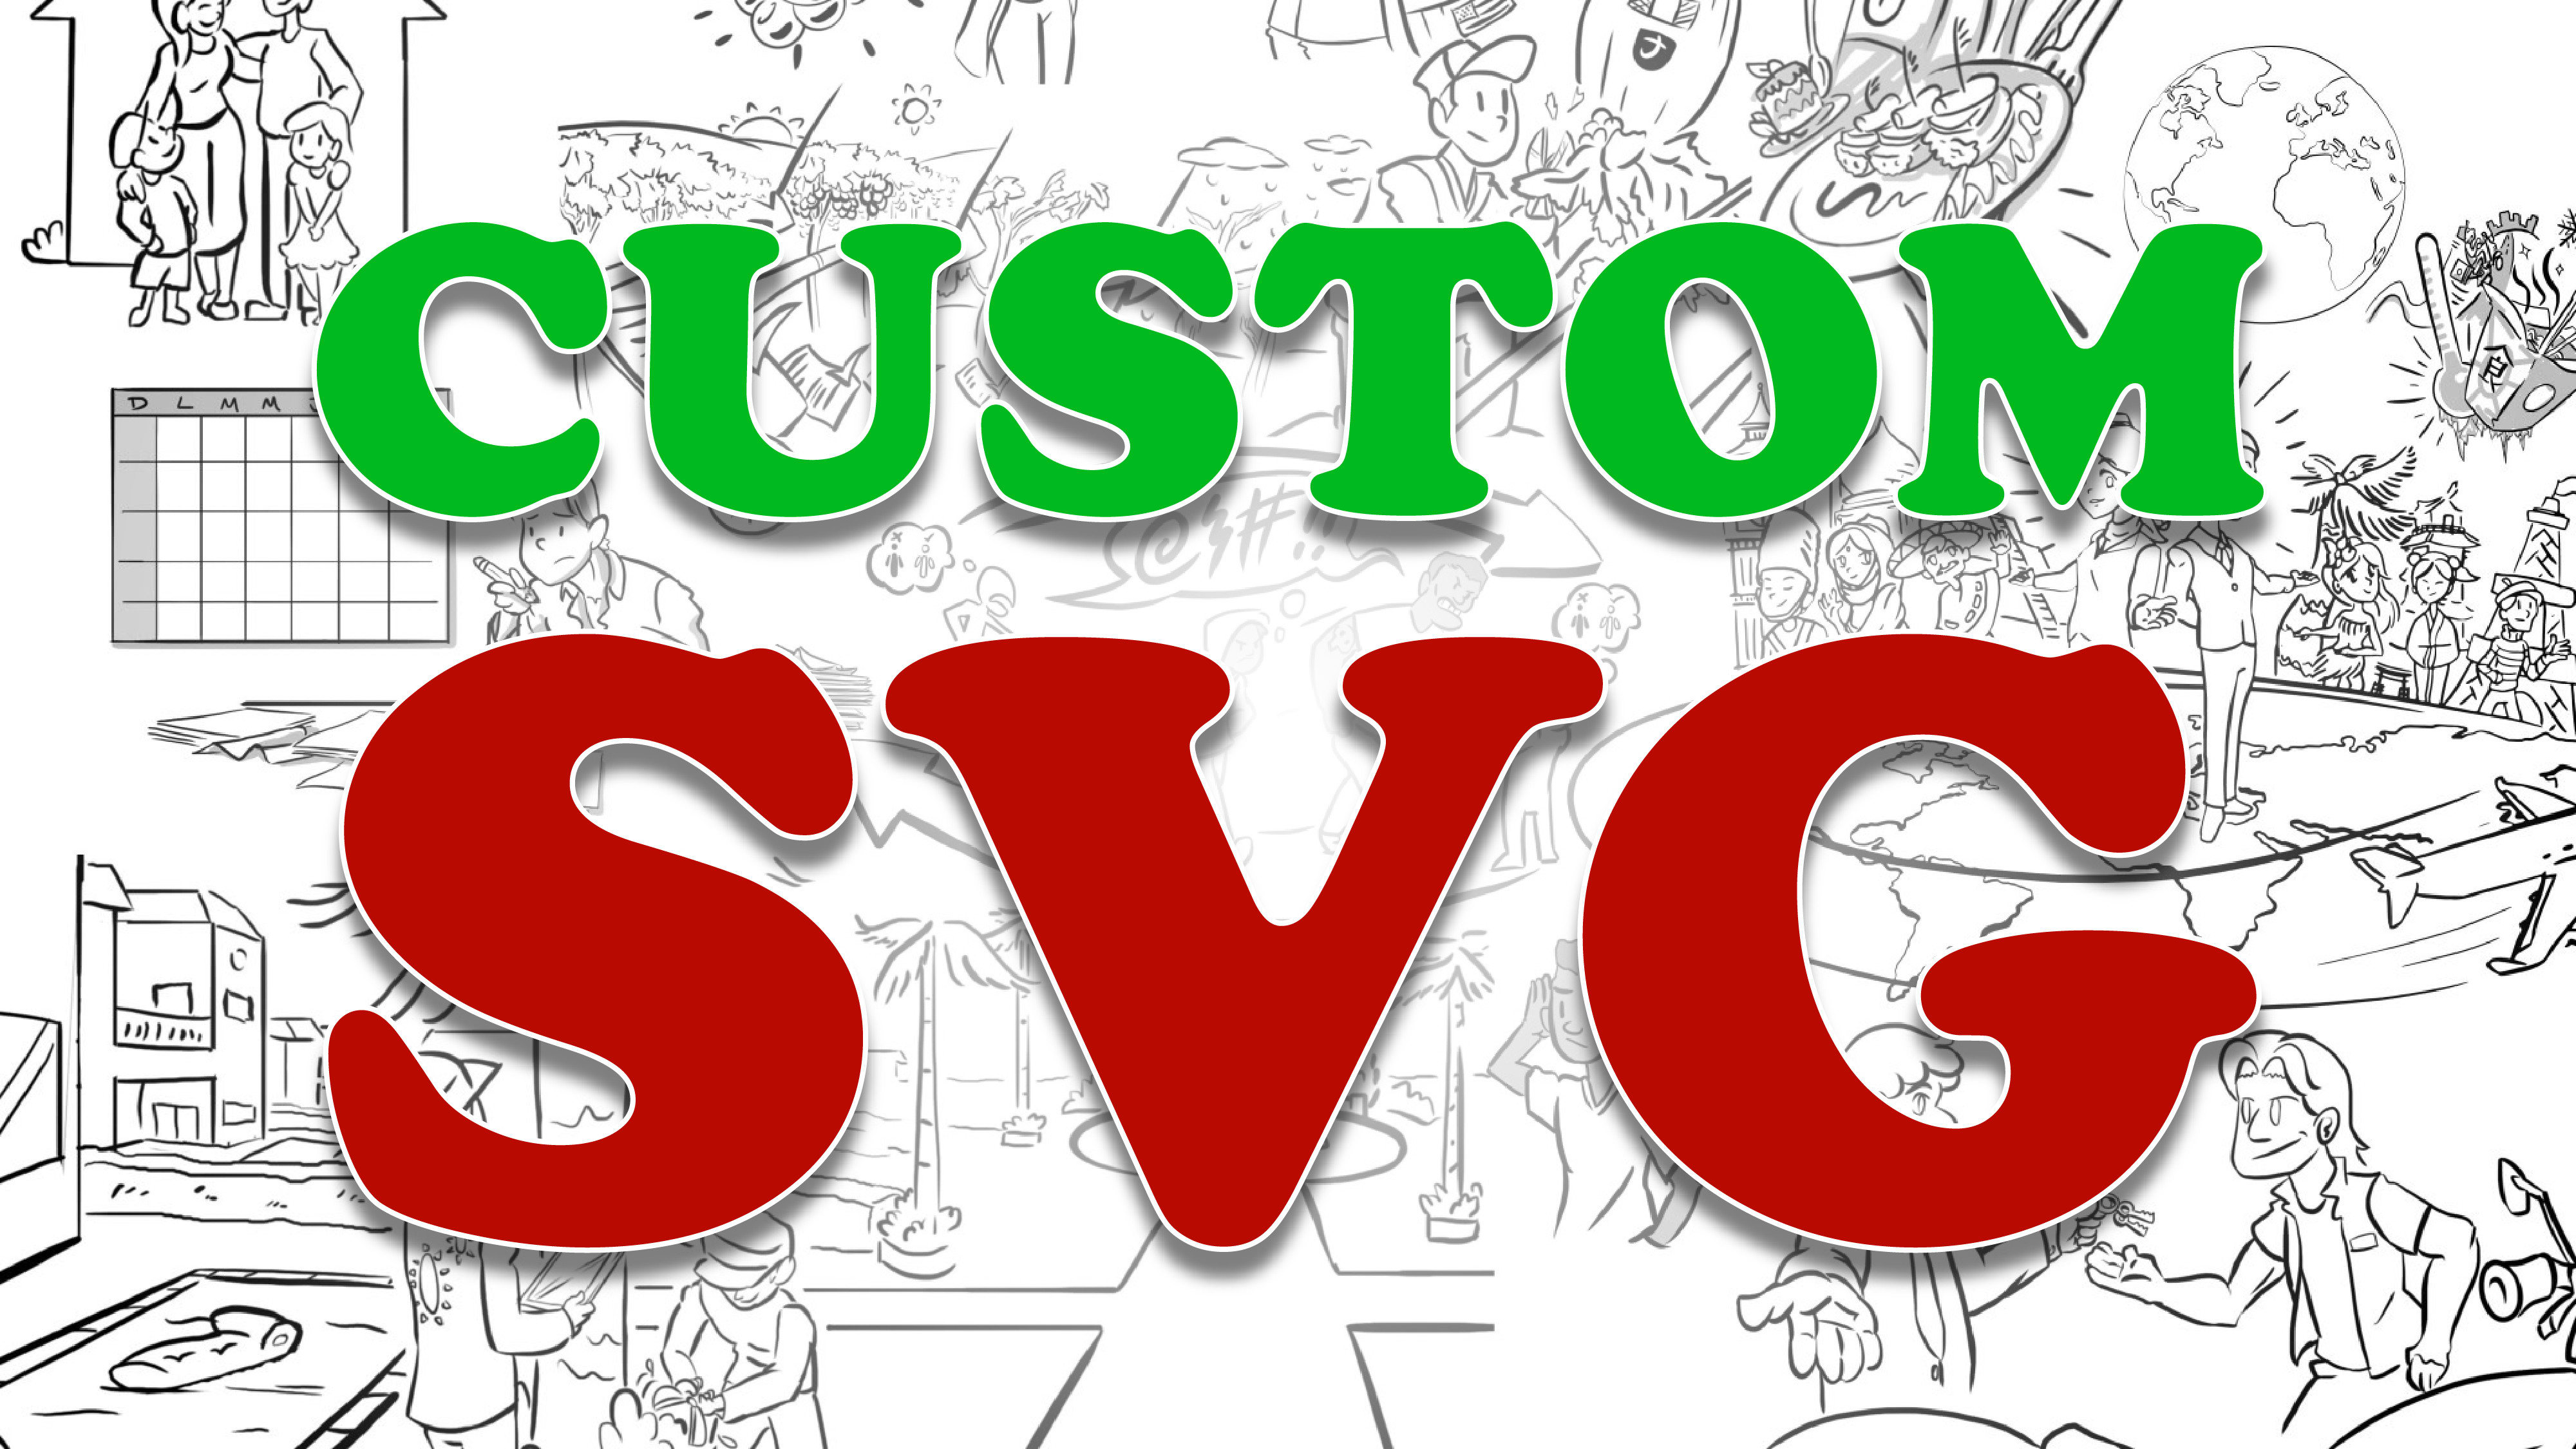 Make custom animated images for videoscribe, just the svg image, not the  video by Spiraldesign | Fiverr